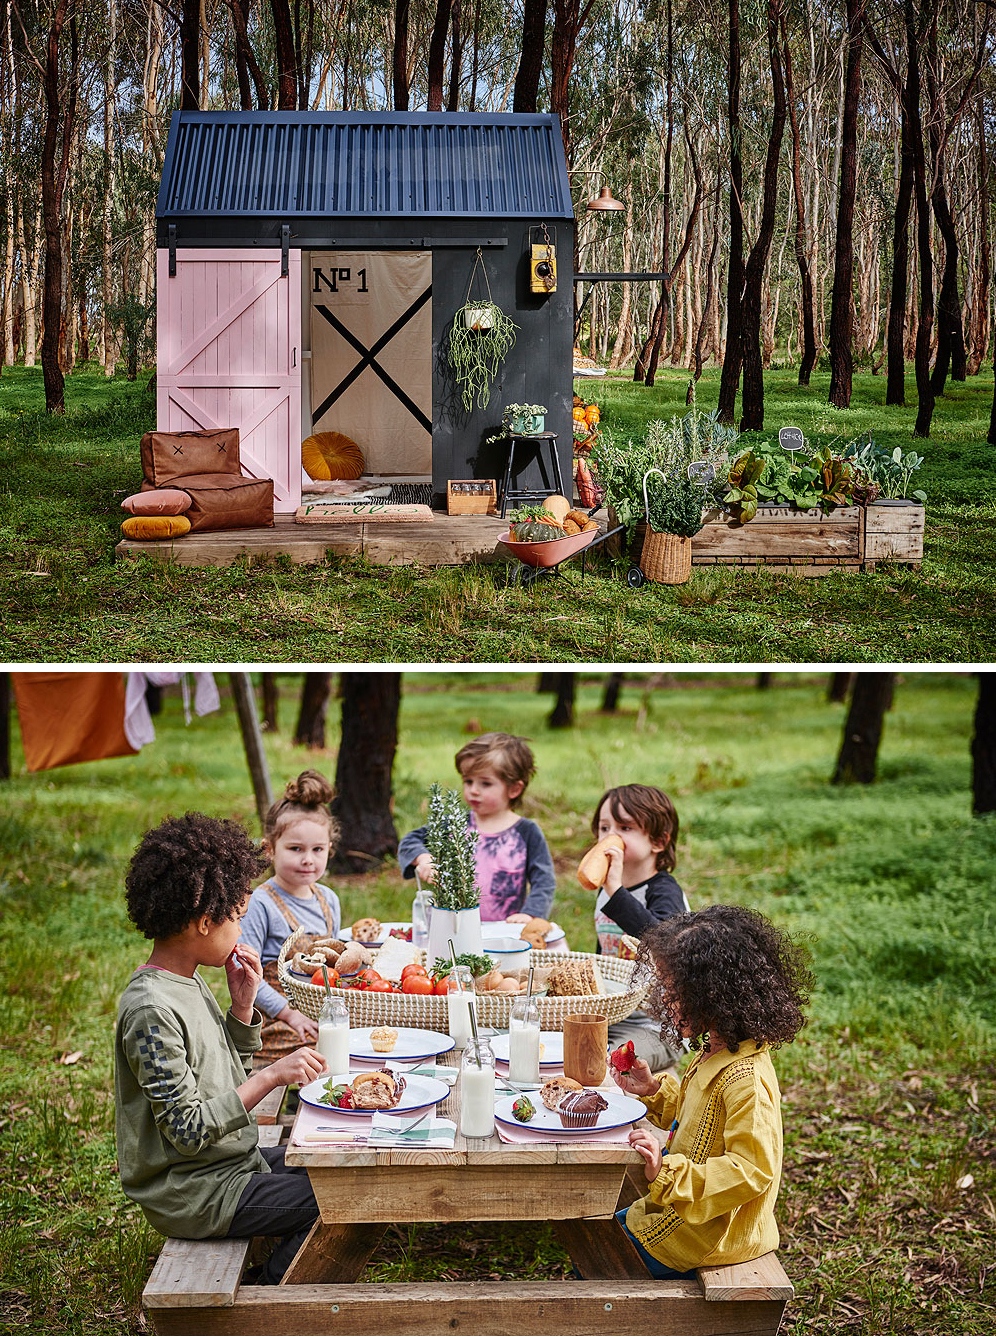 How adorable is this! Best cubby house ever